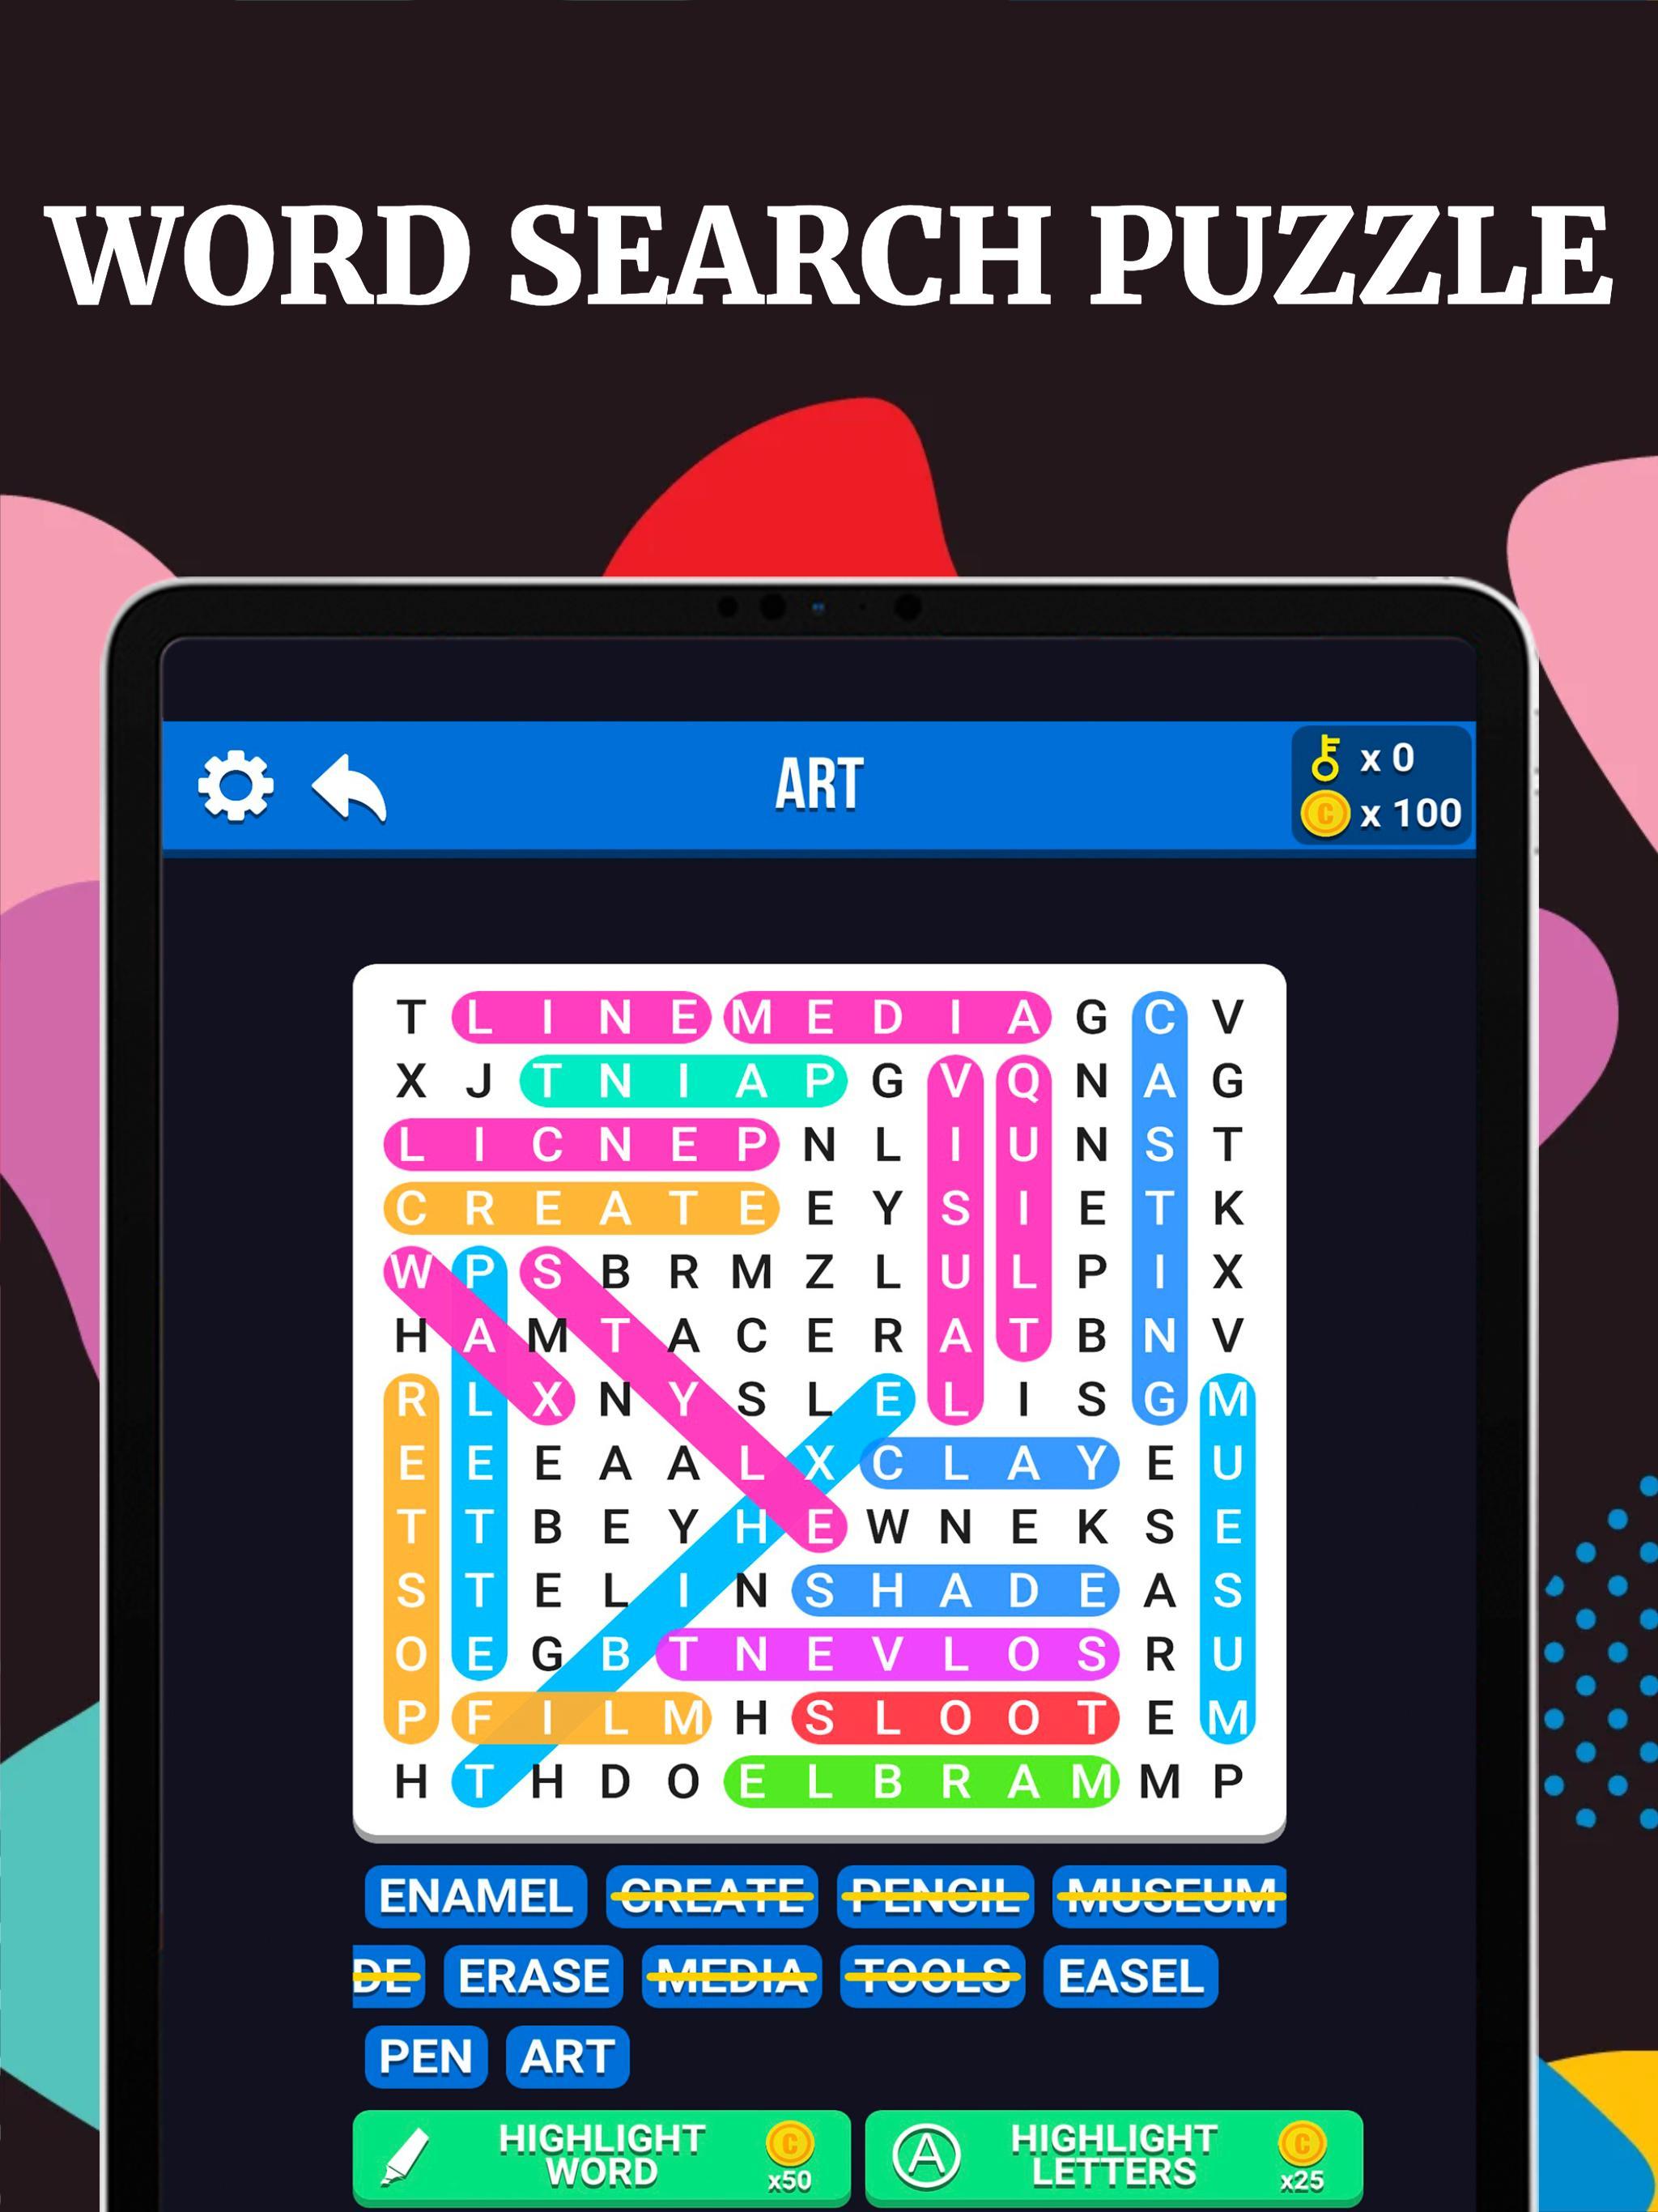 Free Word Search Puzzle - Crossword Puzzle Quest 1.0.8 Screenshot 12